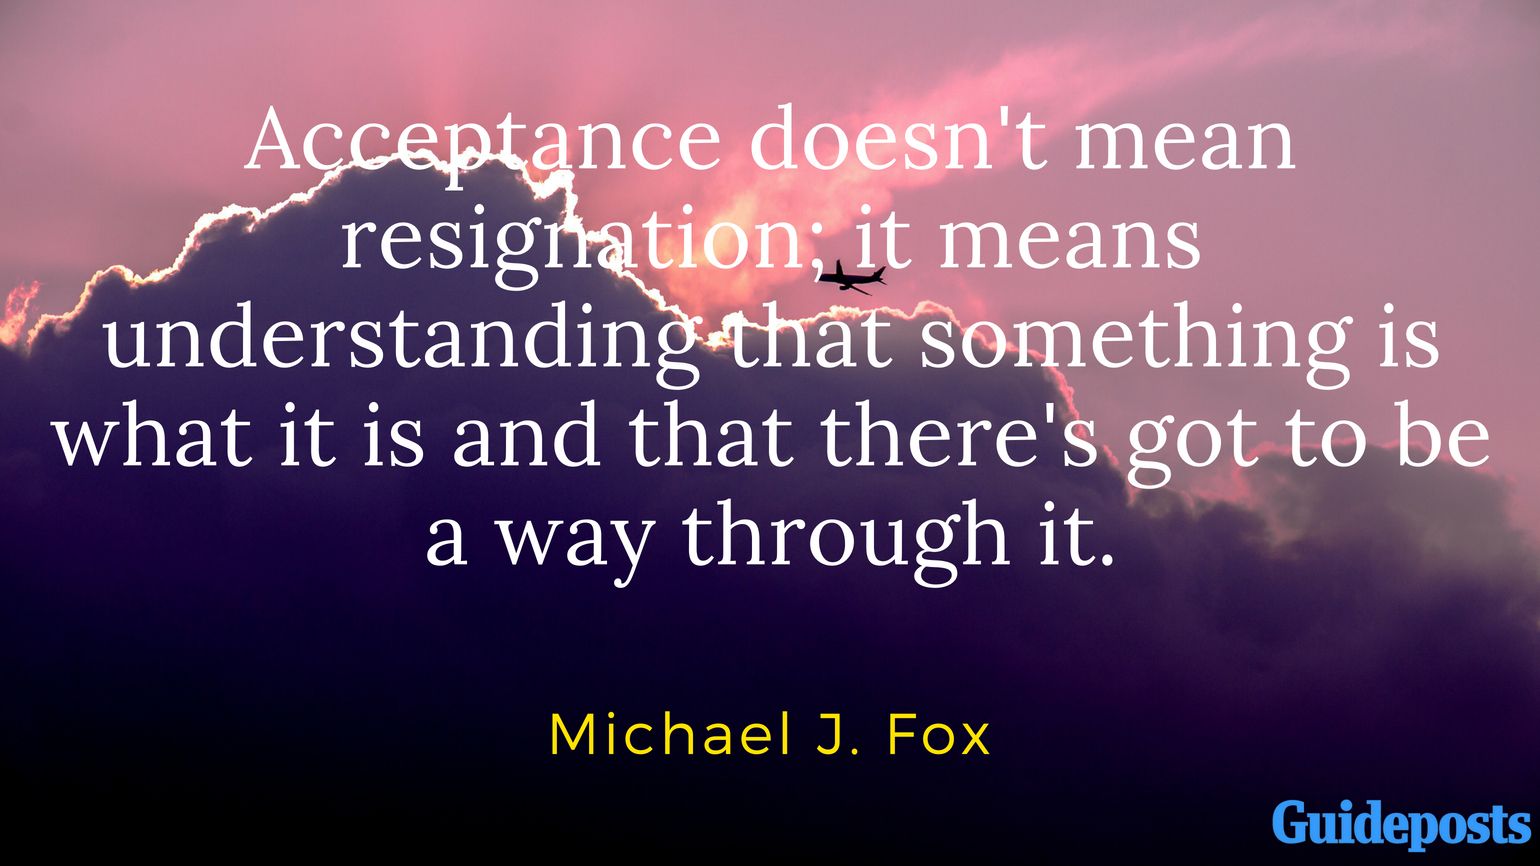 Acceptance doesn't mean resignation; it means understanding that something is what it is and that there's got to be a way through it. - Michael J. Fox